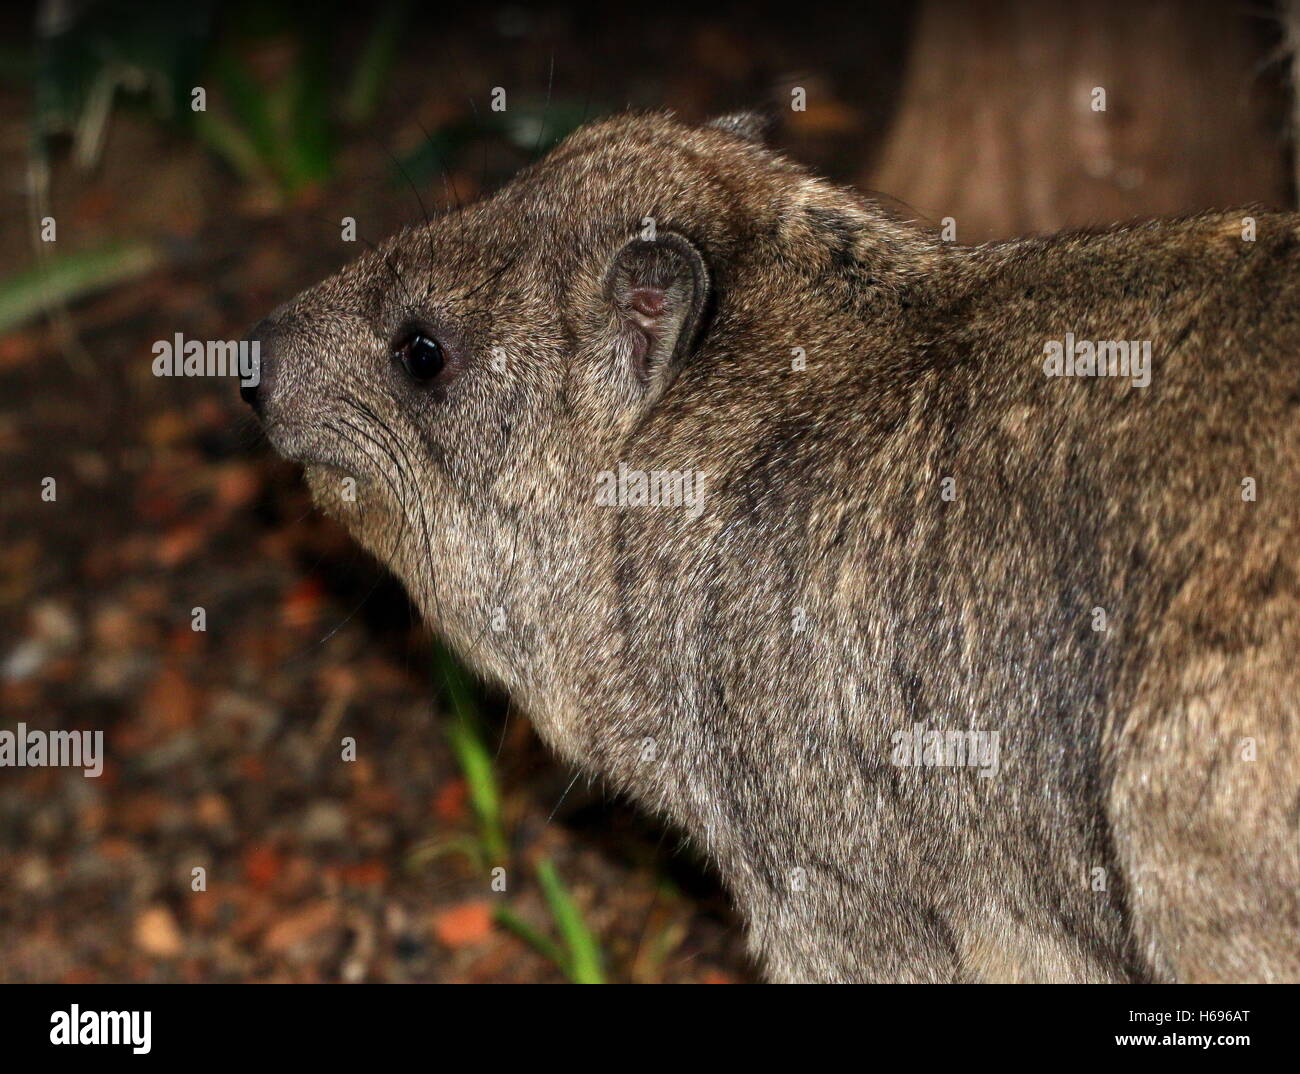 In profile close-up of a South African Cape or rock hyrax (Procavia capensis), a.k.a. Rock badger or 'Dassie' Stock Photo